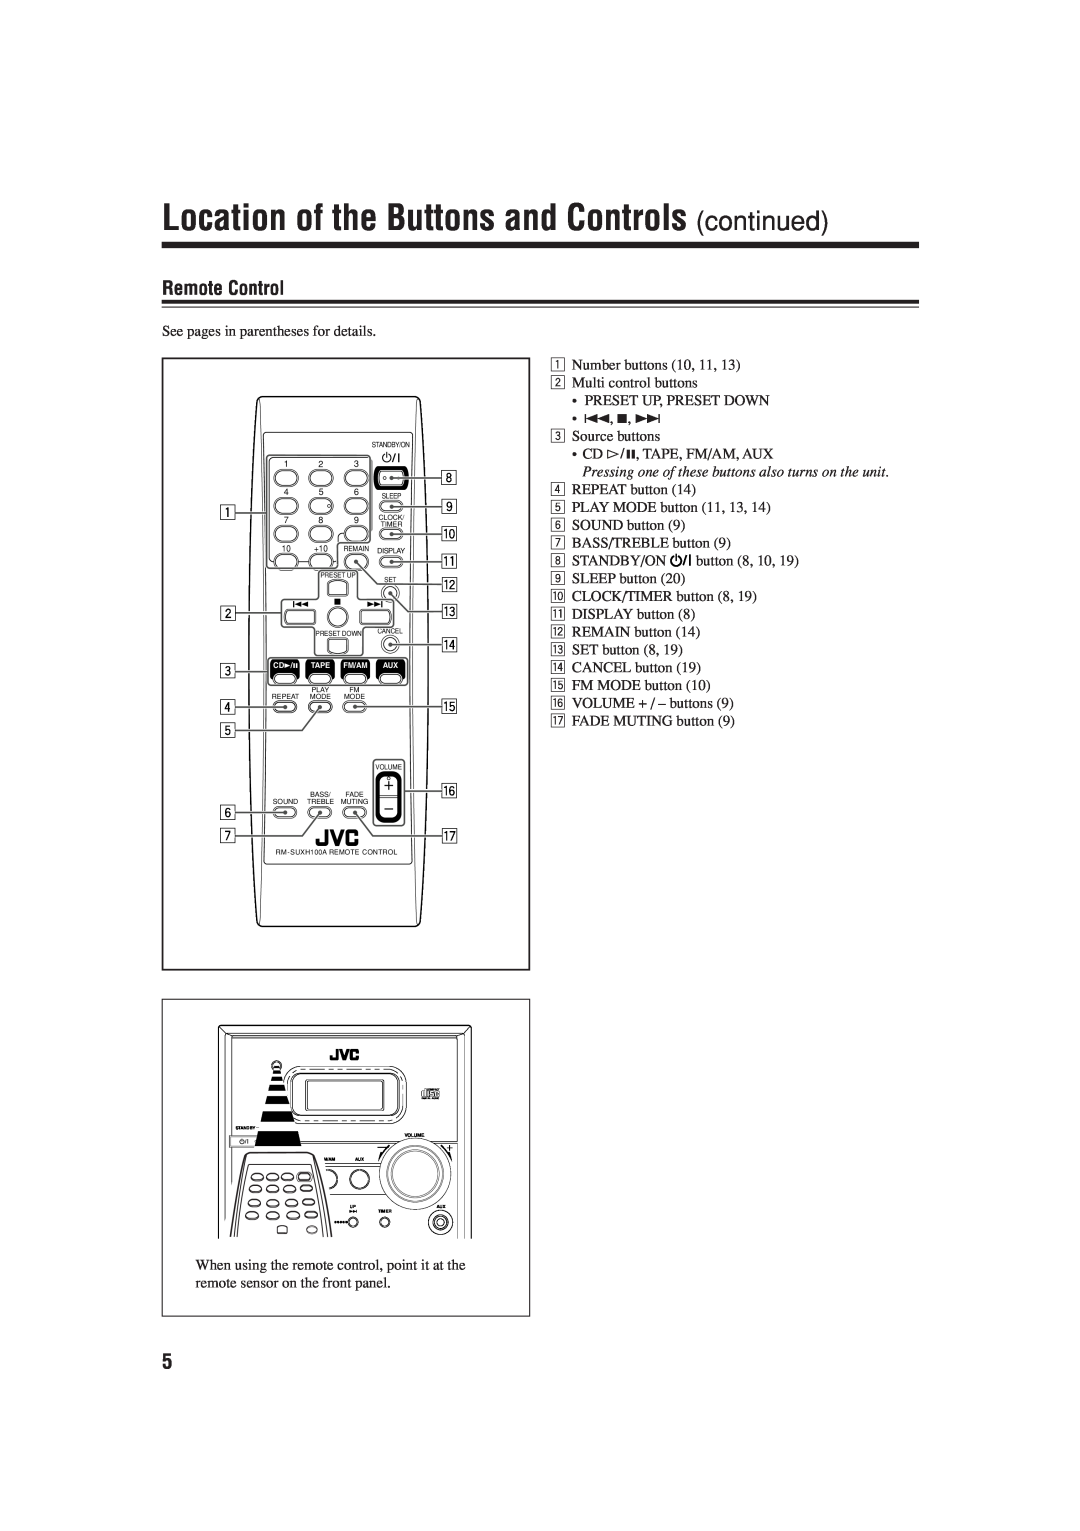 JVC CA-UXH100, UX-H100, SP-UXH100 manual Location of the Buttons and Controls continued, Remote Control 